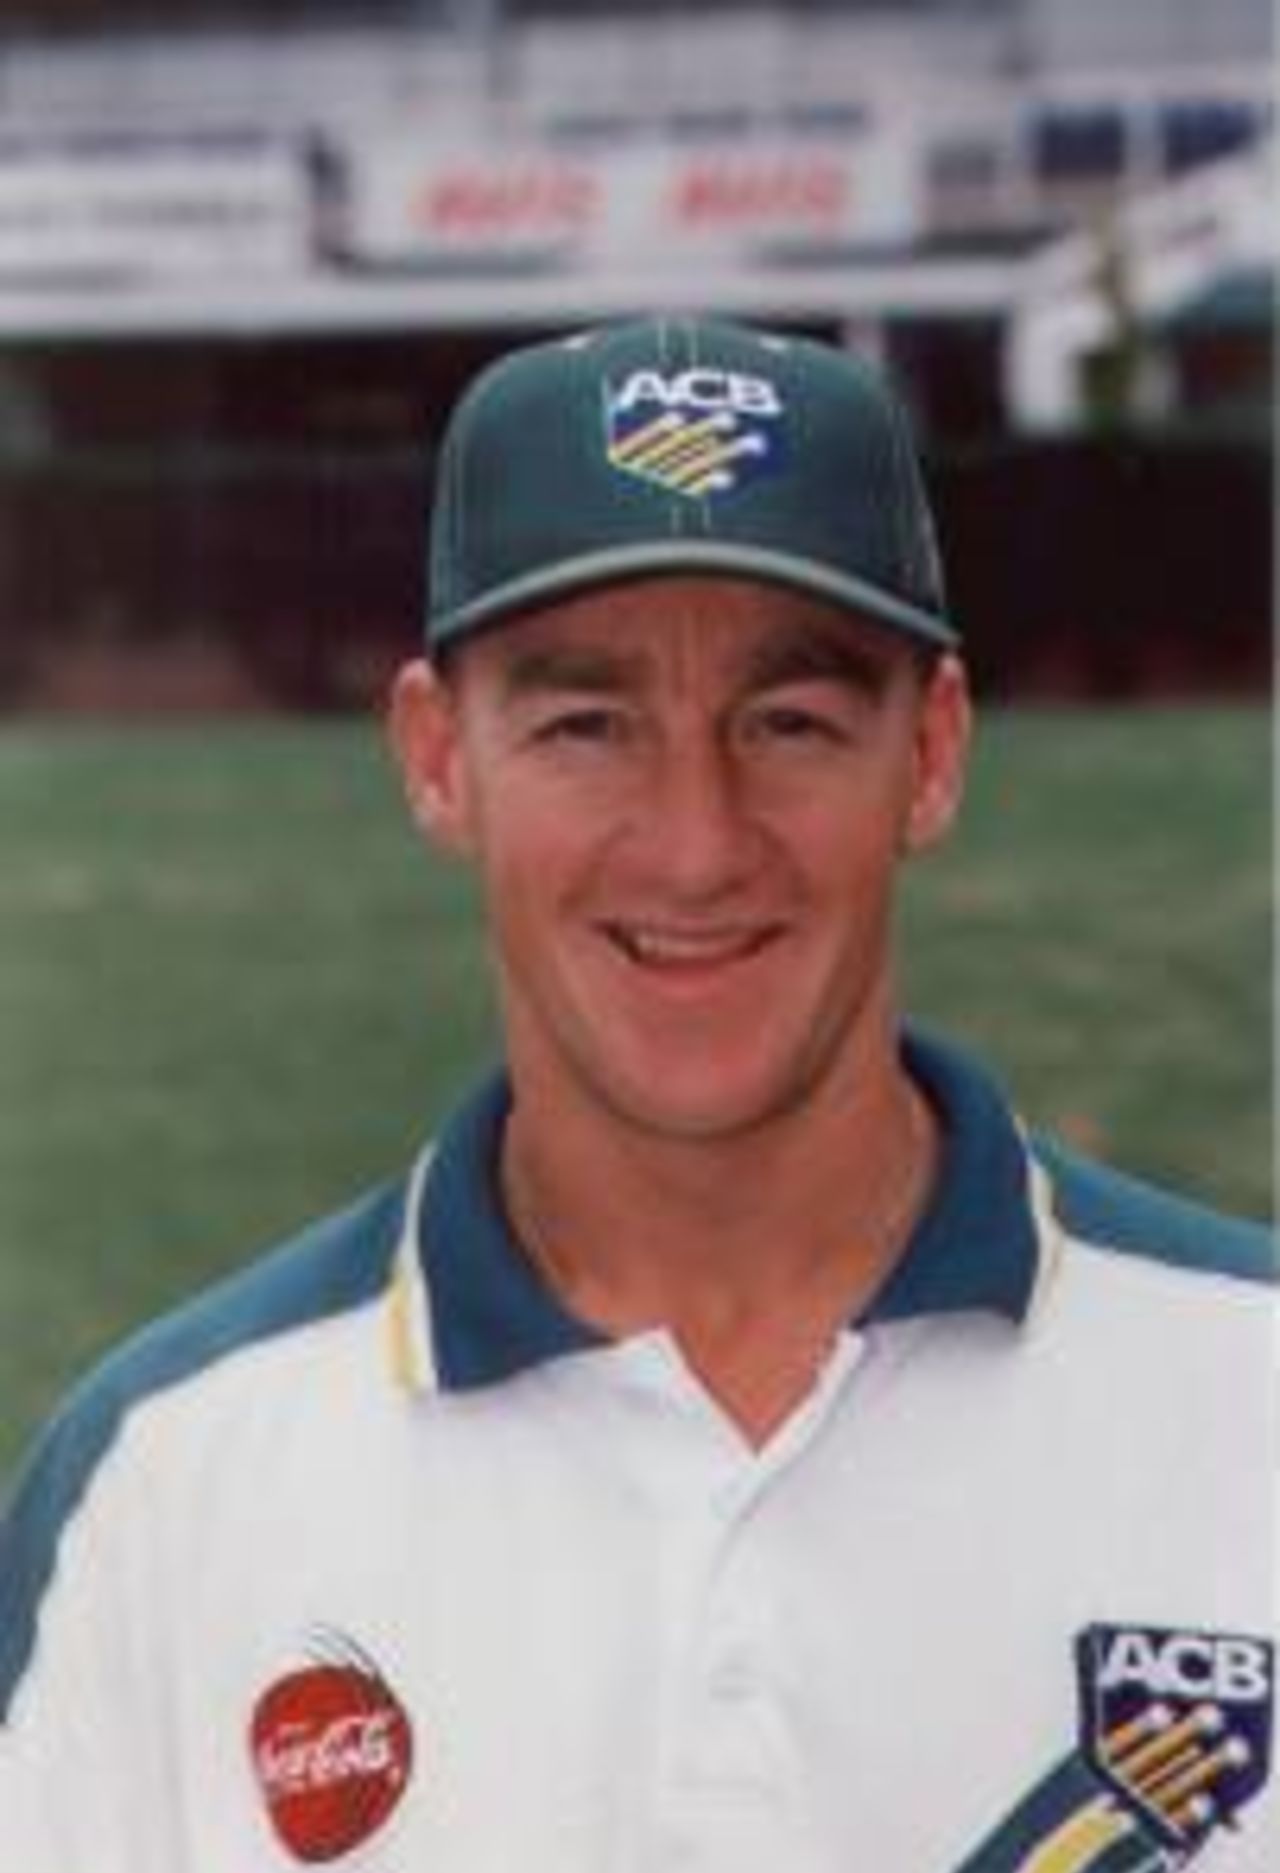 Portrait of Andy Bichel taken during Australia's tour of South Africa, 1996.